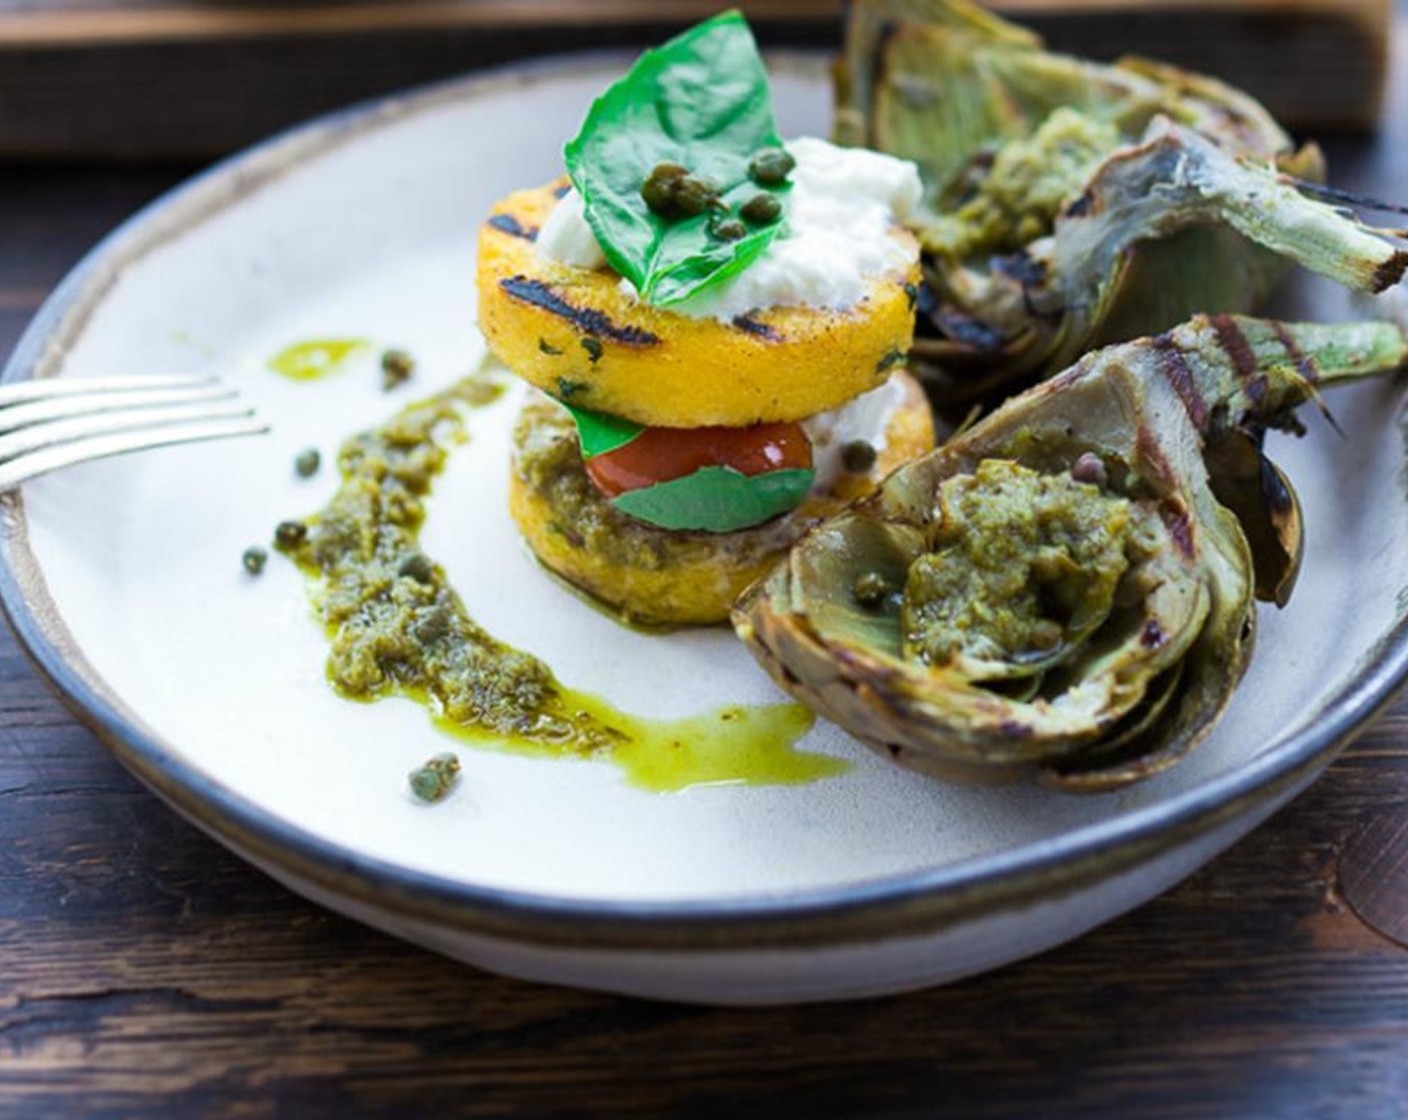 step 17 This can also be individually plated. Layer polenta, burrata cheese, pesto, tomatoes, basil and top with polenta. Surround with pesto and capers and a couple grilled artichoke wedges. Enjoy!